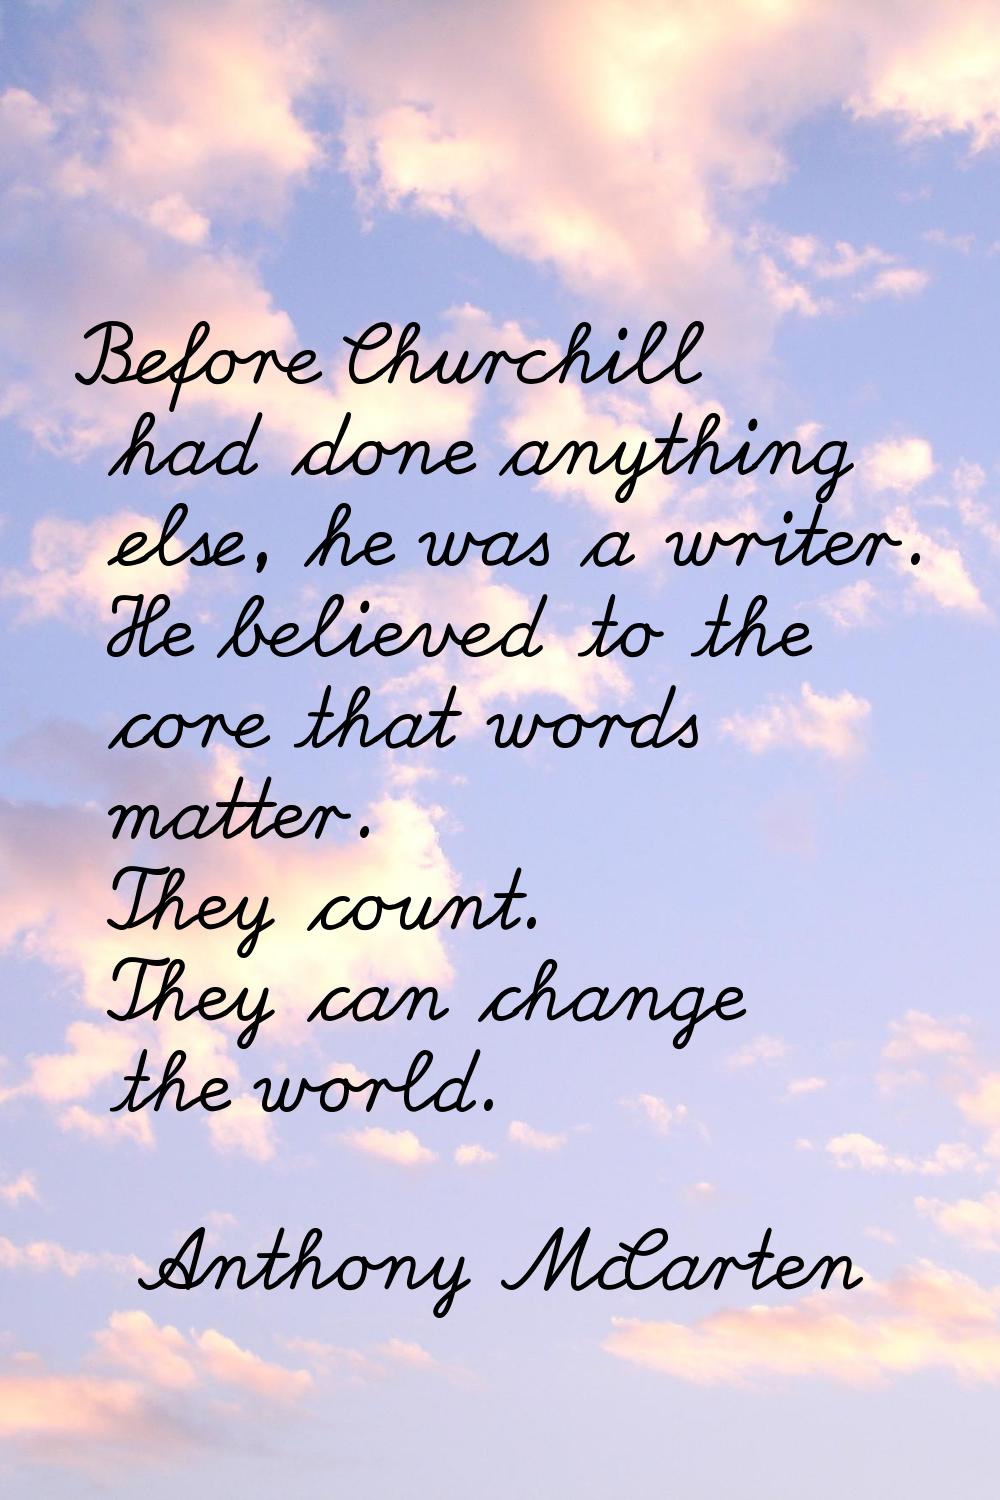 Before Churchill had done anything else, he was a writer. He believed to the core that words matter